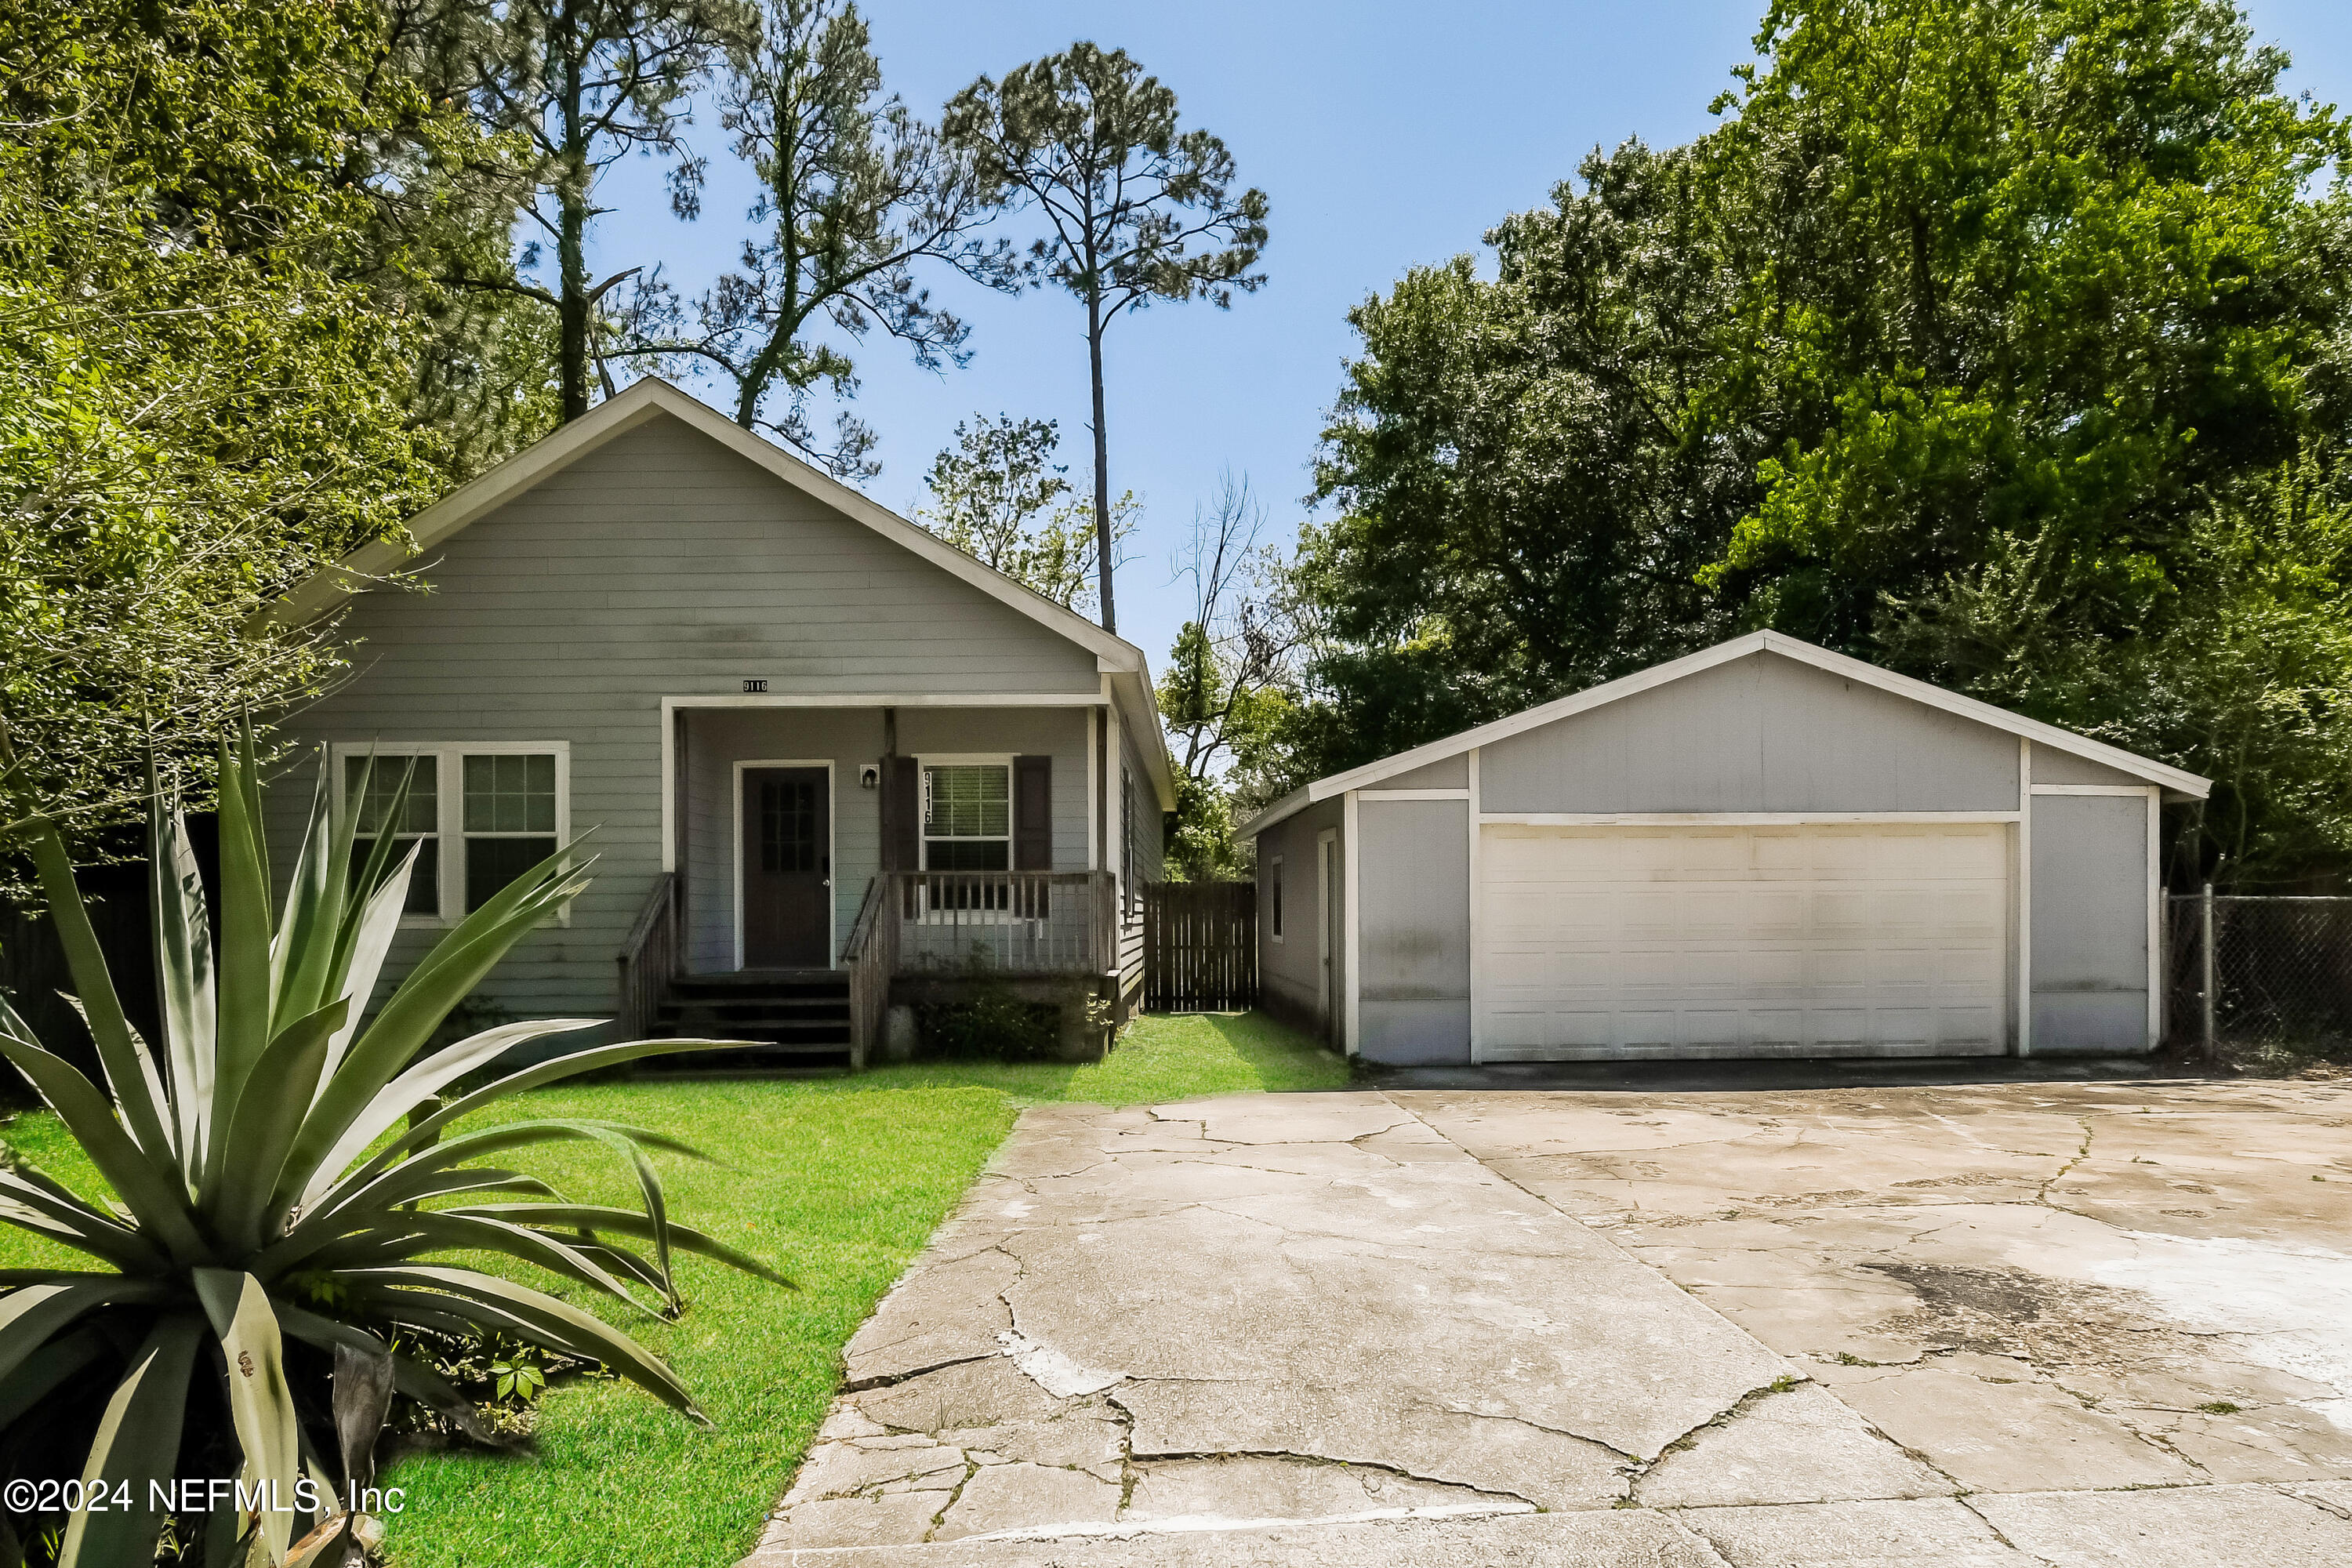 Jacksonville, FL home for sale located at 9116 Wollitz Plaza, Jacksonville, FL 32220